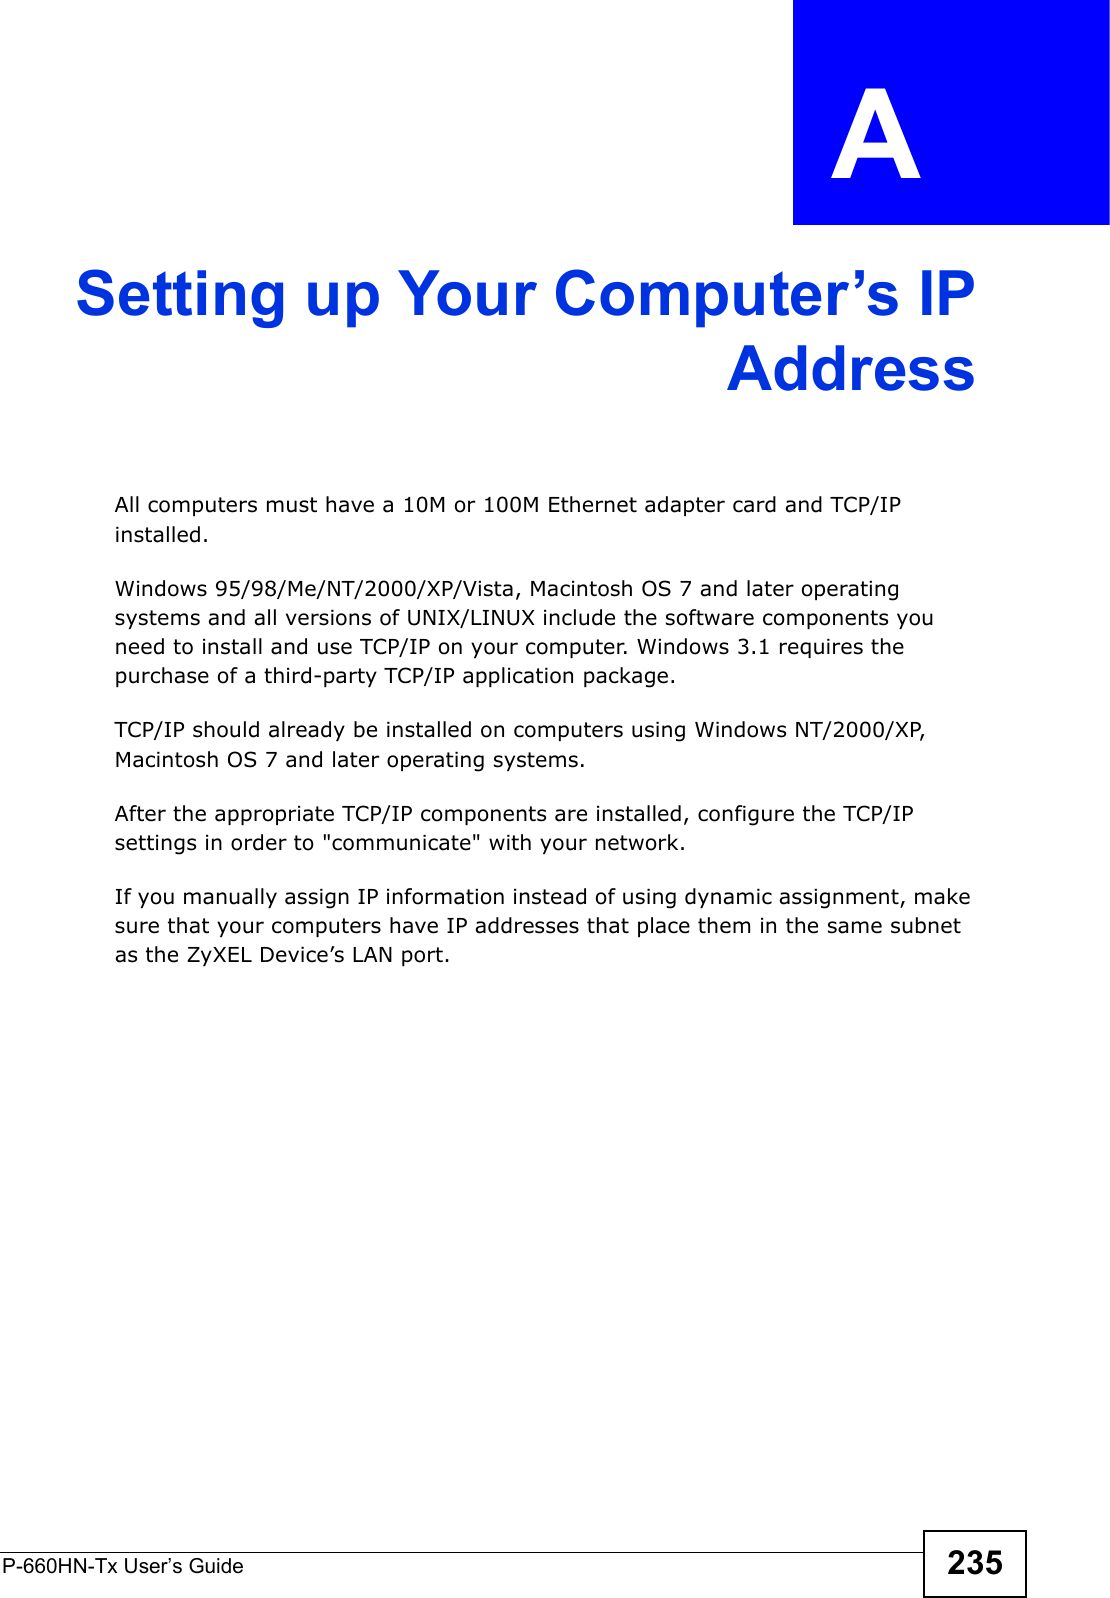 P-660HN-Tx User’s Guide 235APPENDIX  A Setting up Your Computer’s IPAddressAll computers must have a 10M or 100M Ethernet adapter card and TCP/IP installed. Windows 95/98/Me/NT/2000/XP/Vista, Macintosh OS 7 and later operating systems and all versions of UNIX/LINUX include the software components you need to install and use TCP/IP on your computer. Windows 3.1 requires the purchase of a third-party TCP/IP application package.TCP/IP should already be installed on computers using Windows NT/2000/XP, Macintosh OS 7 and later operating systems.After the appropriate TCP/IP components are installed, configure the TCP/IP settings in order to &quot;communicate&quot; with your network. If you manually assign IP information instead of using dynamic assignment, make sure that your computers have IP addresses that place them in the same subnet as the ZyXEL Device’s LAN port.